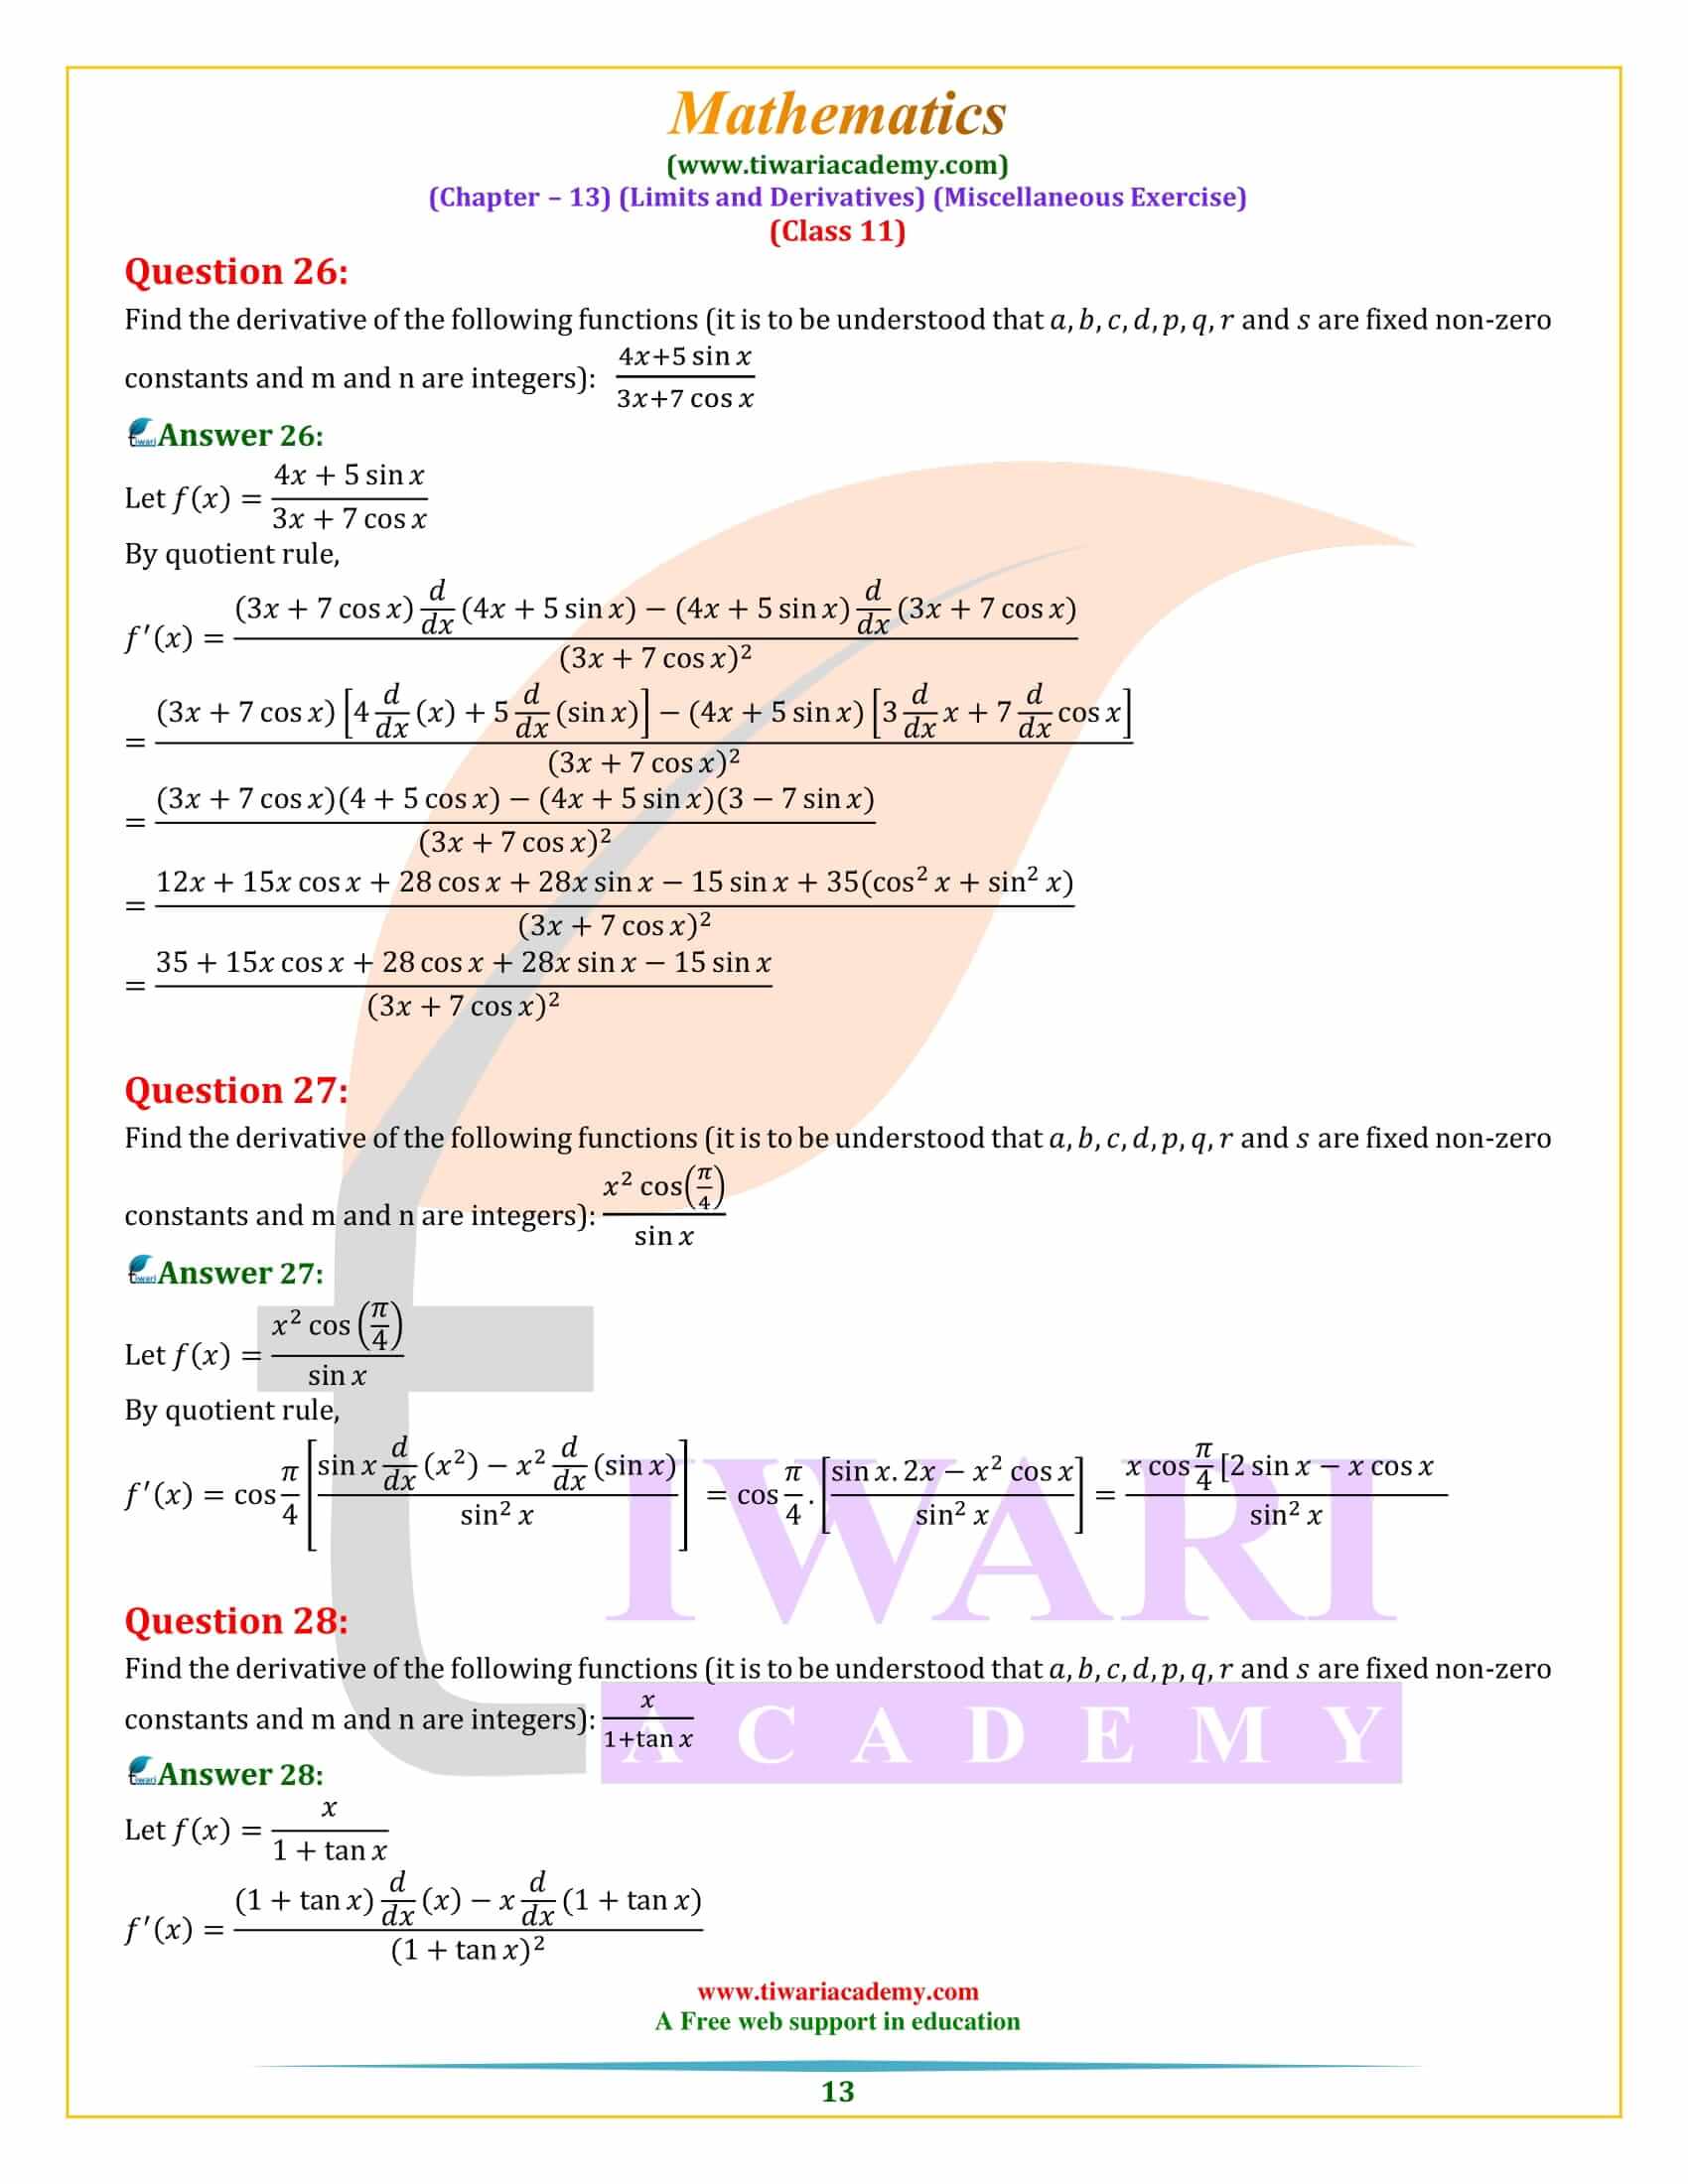 NCERT Solutions for Class 11 Maths Chapter 13 Miscellaneous Exercise free download